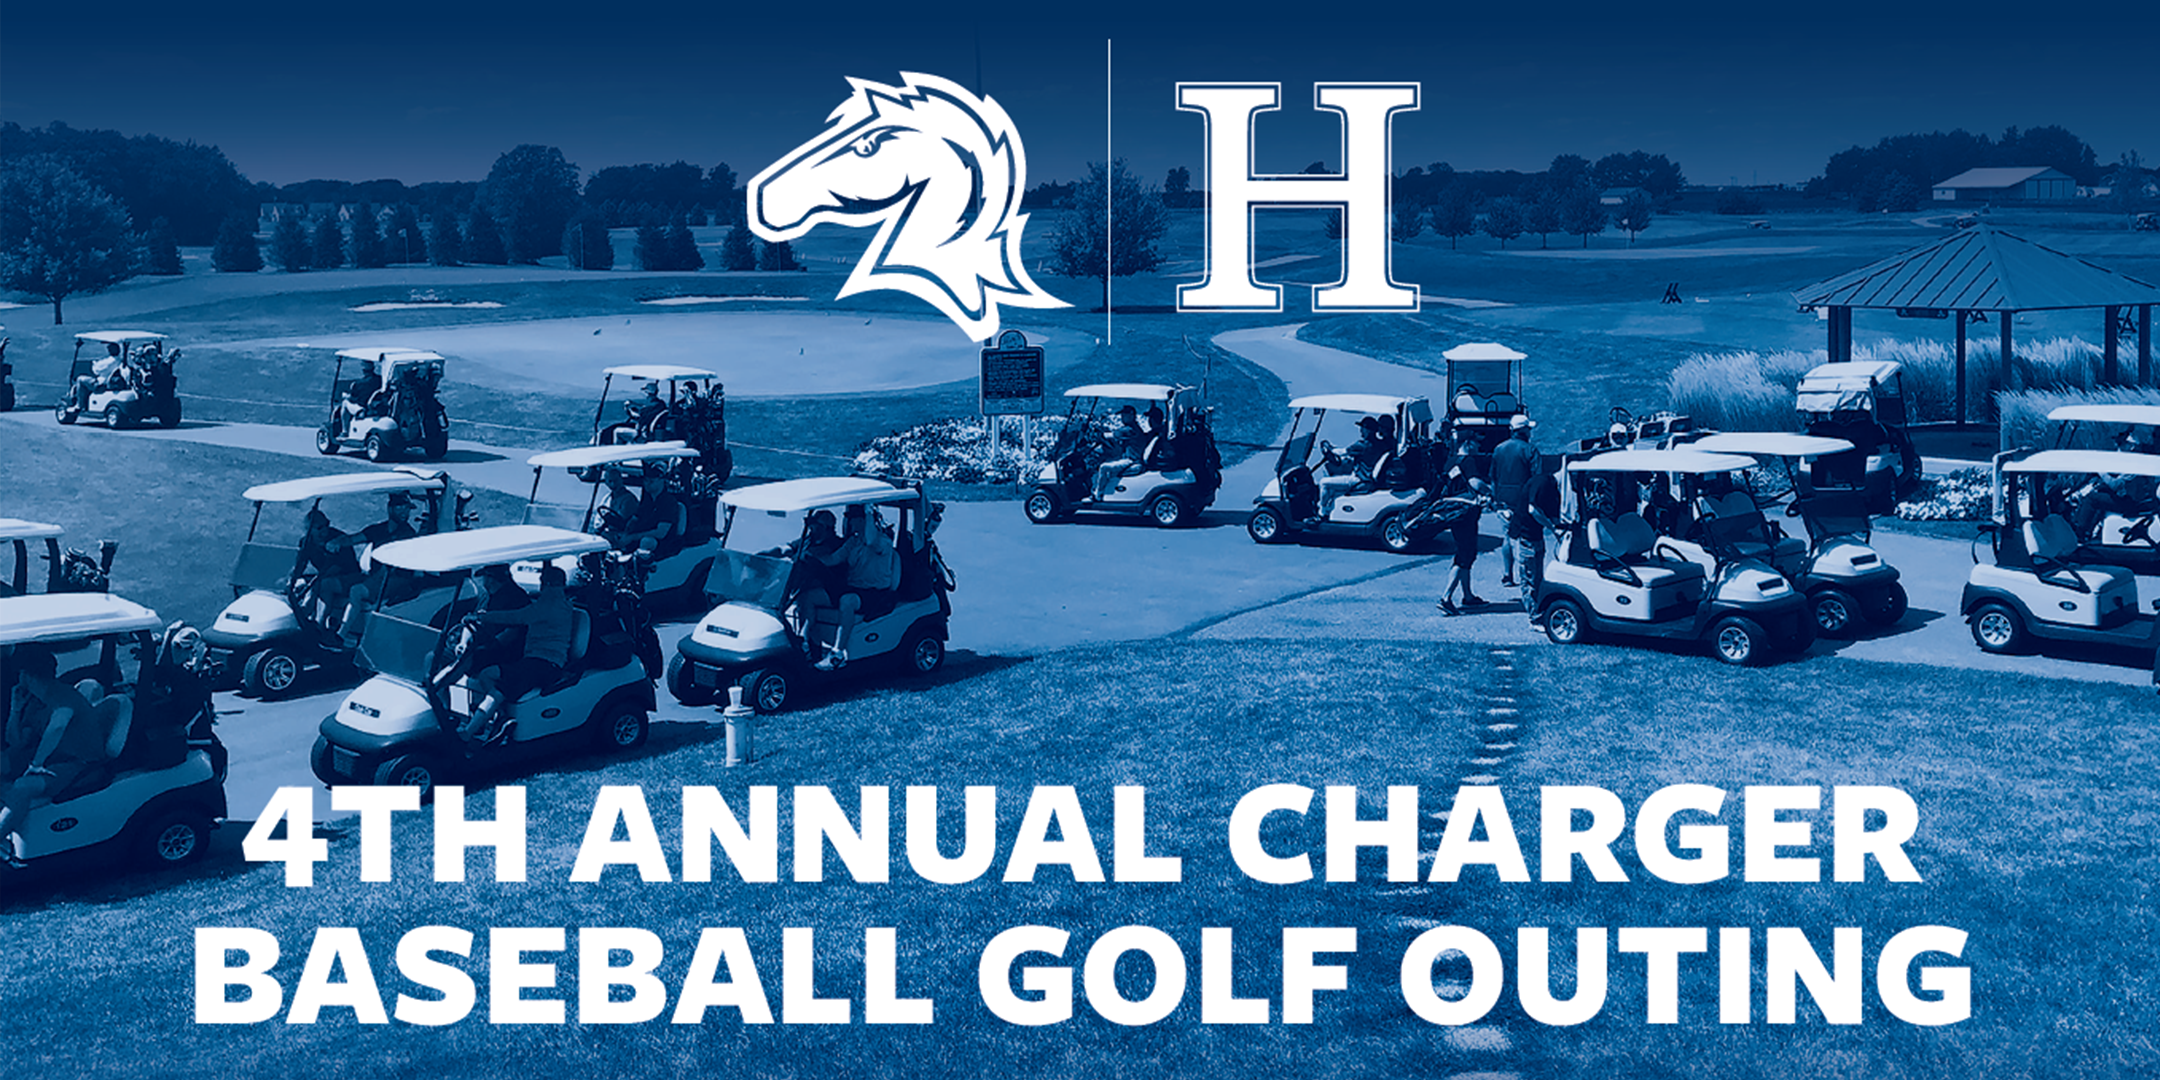 Hillsdale College Charger Baseball Golf Outing